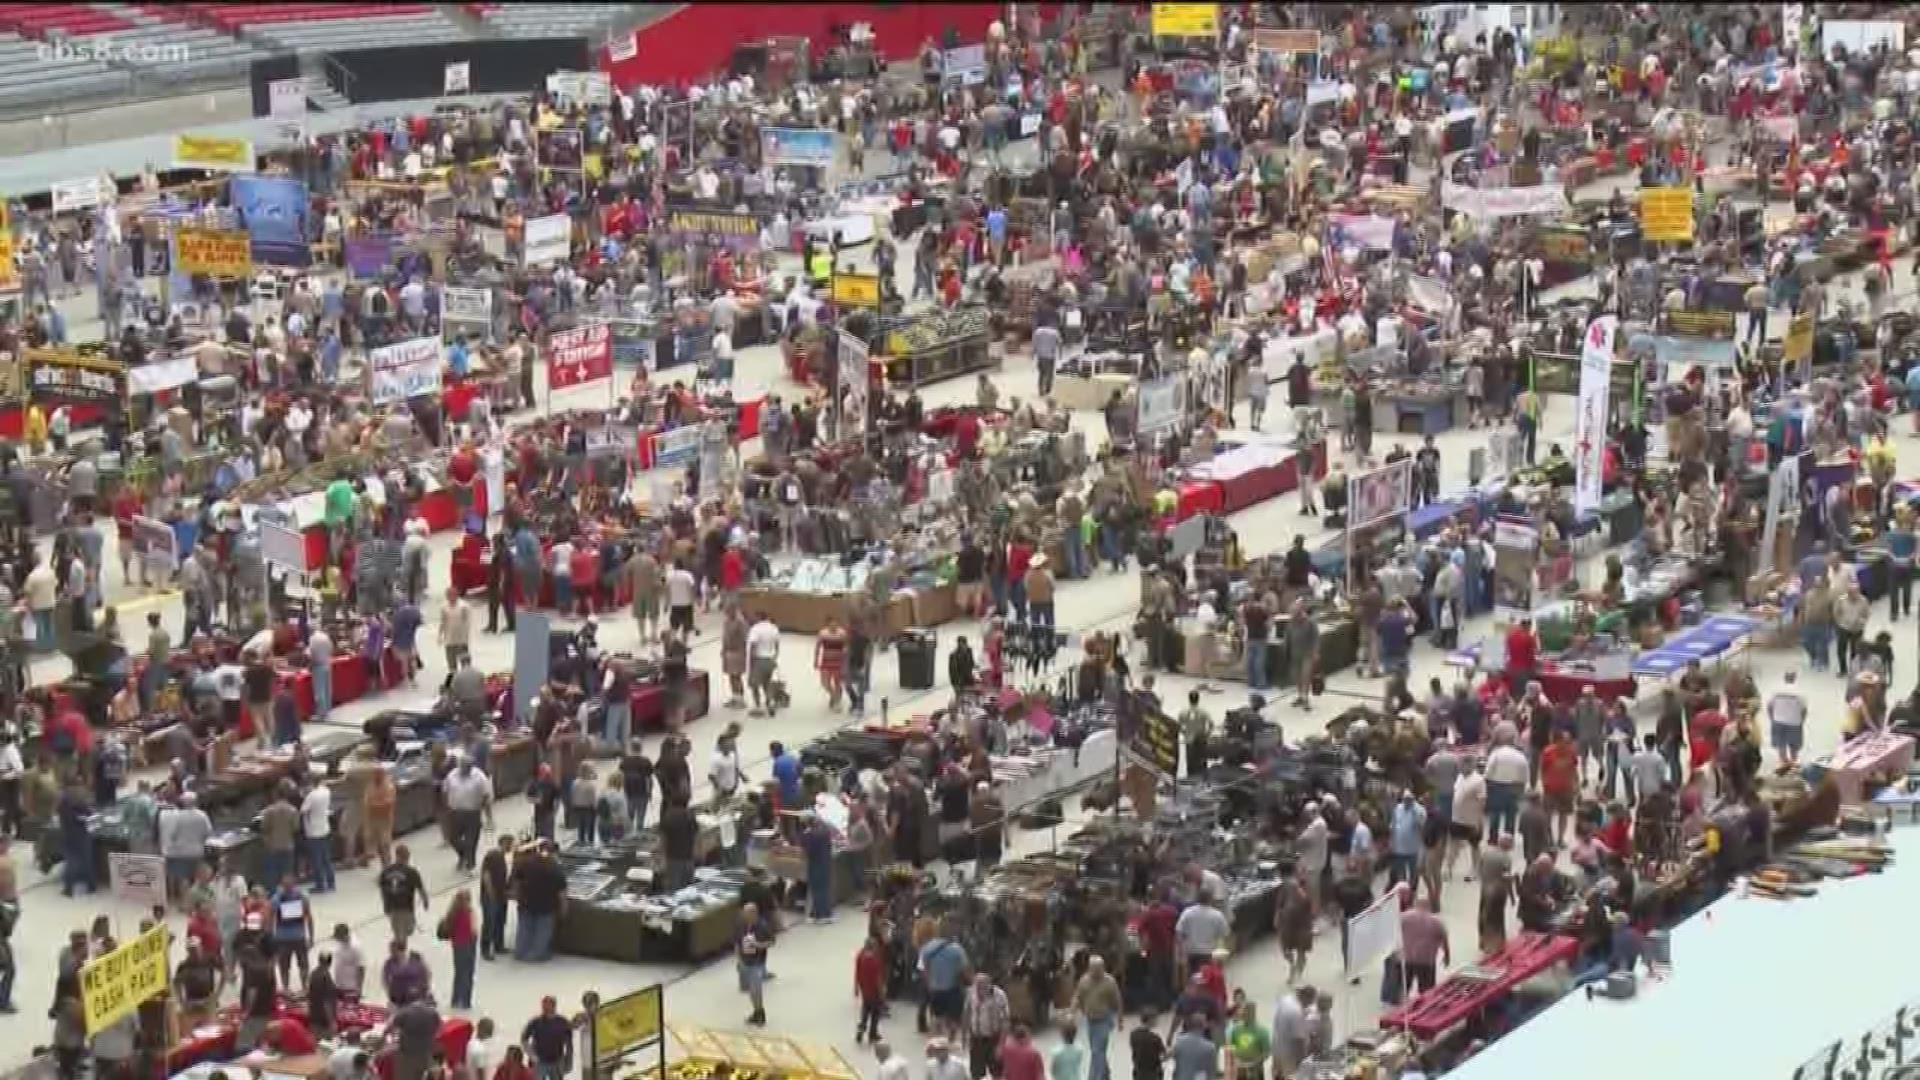 The Crossroads of the West Gun Show returns this weekend to Del Mar after a nine-month hiatus, and more people are expected because it was suspended for so long.